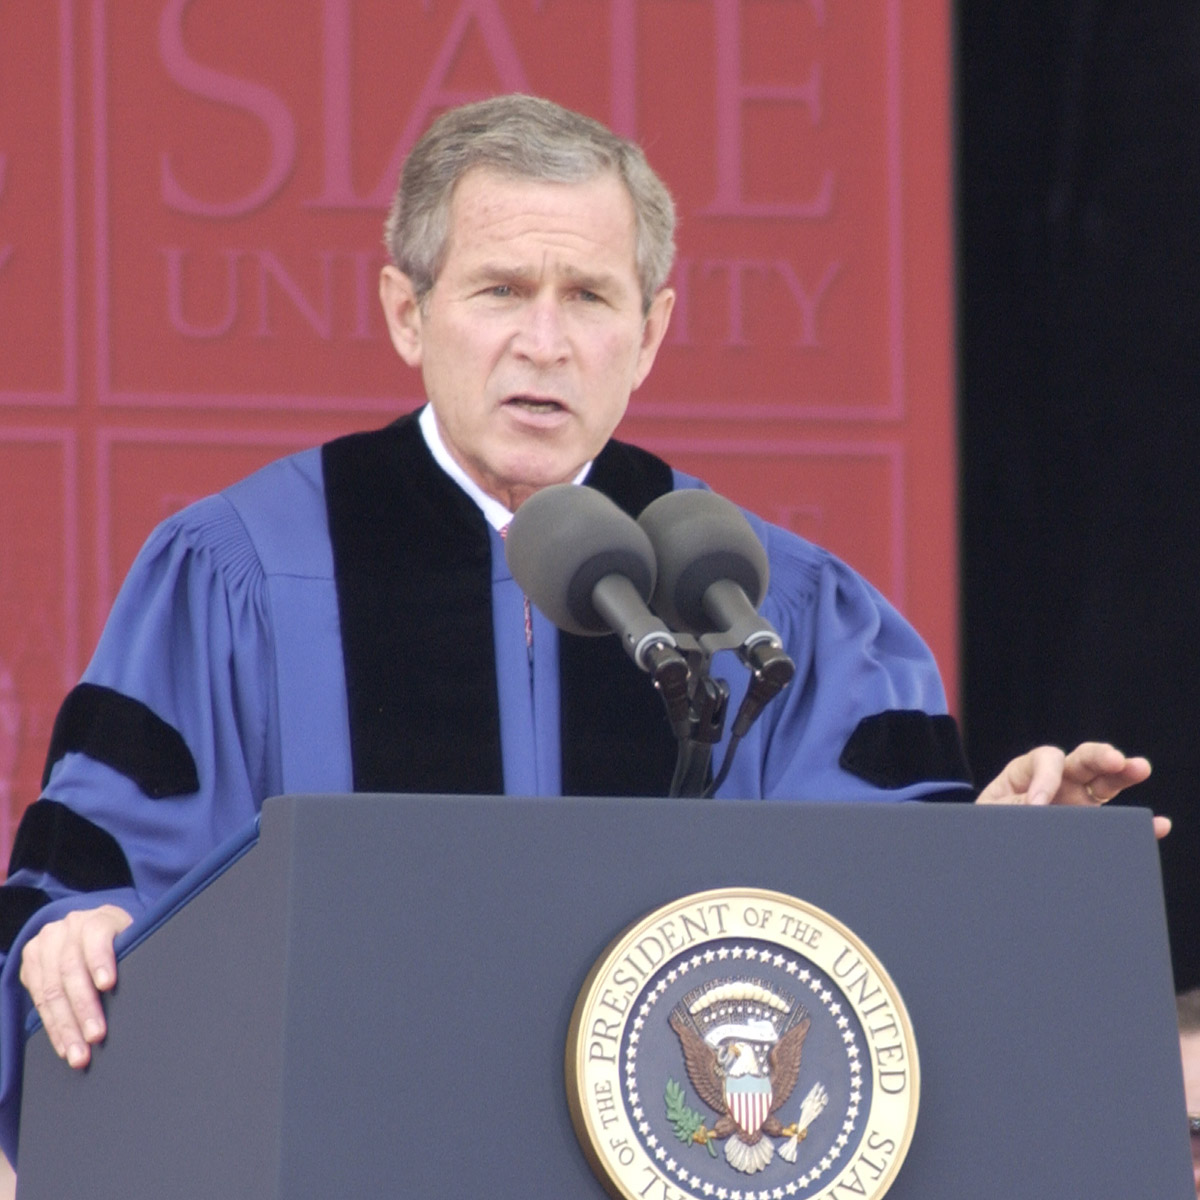 Former President George W. Bush speaks at a lectern wearing grad  robes.